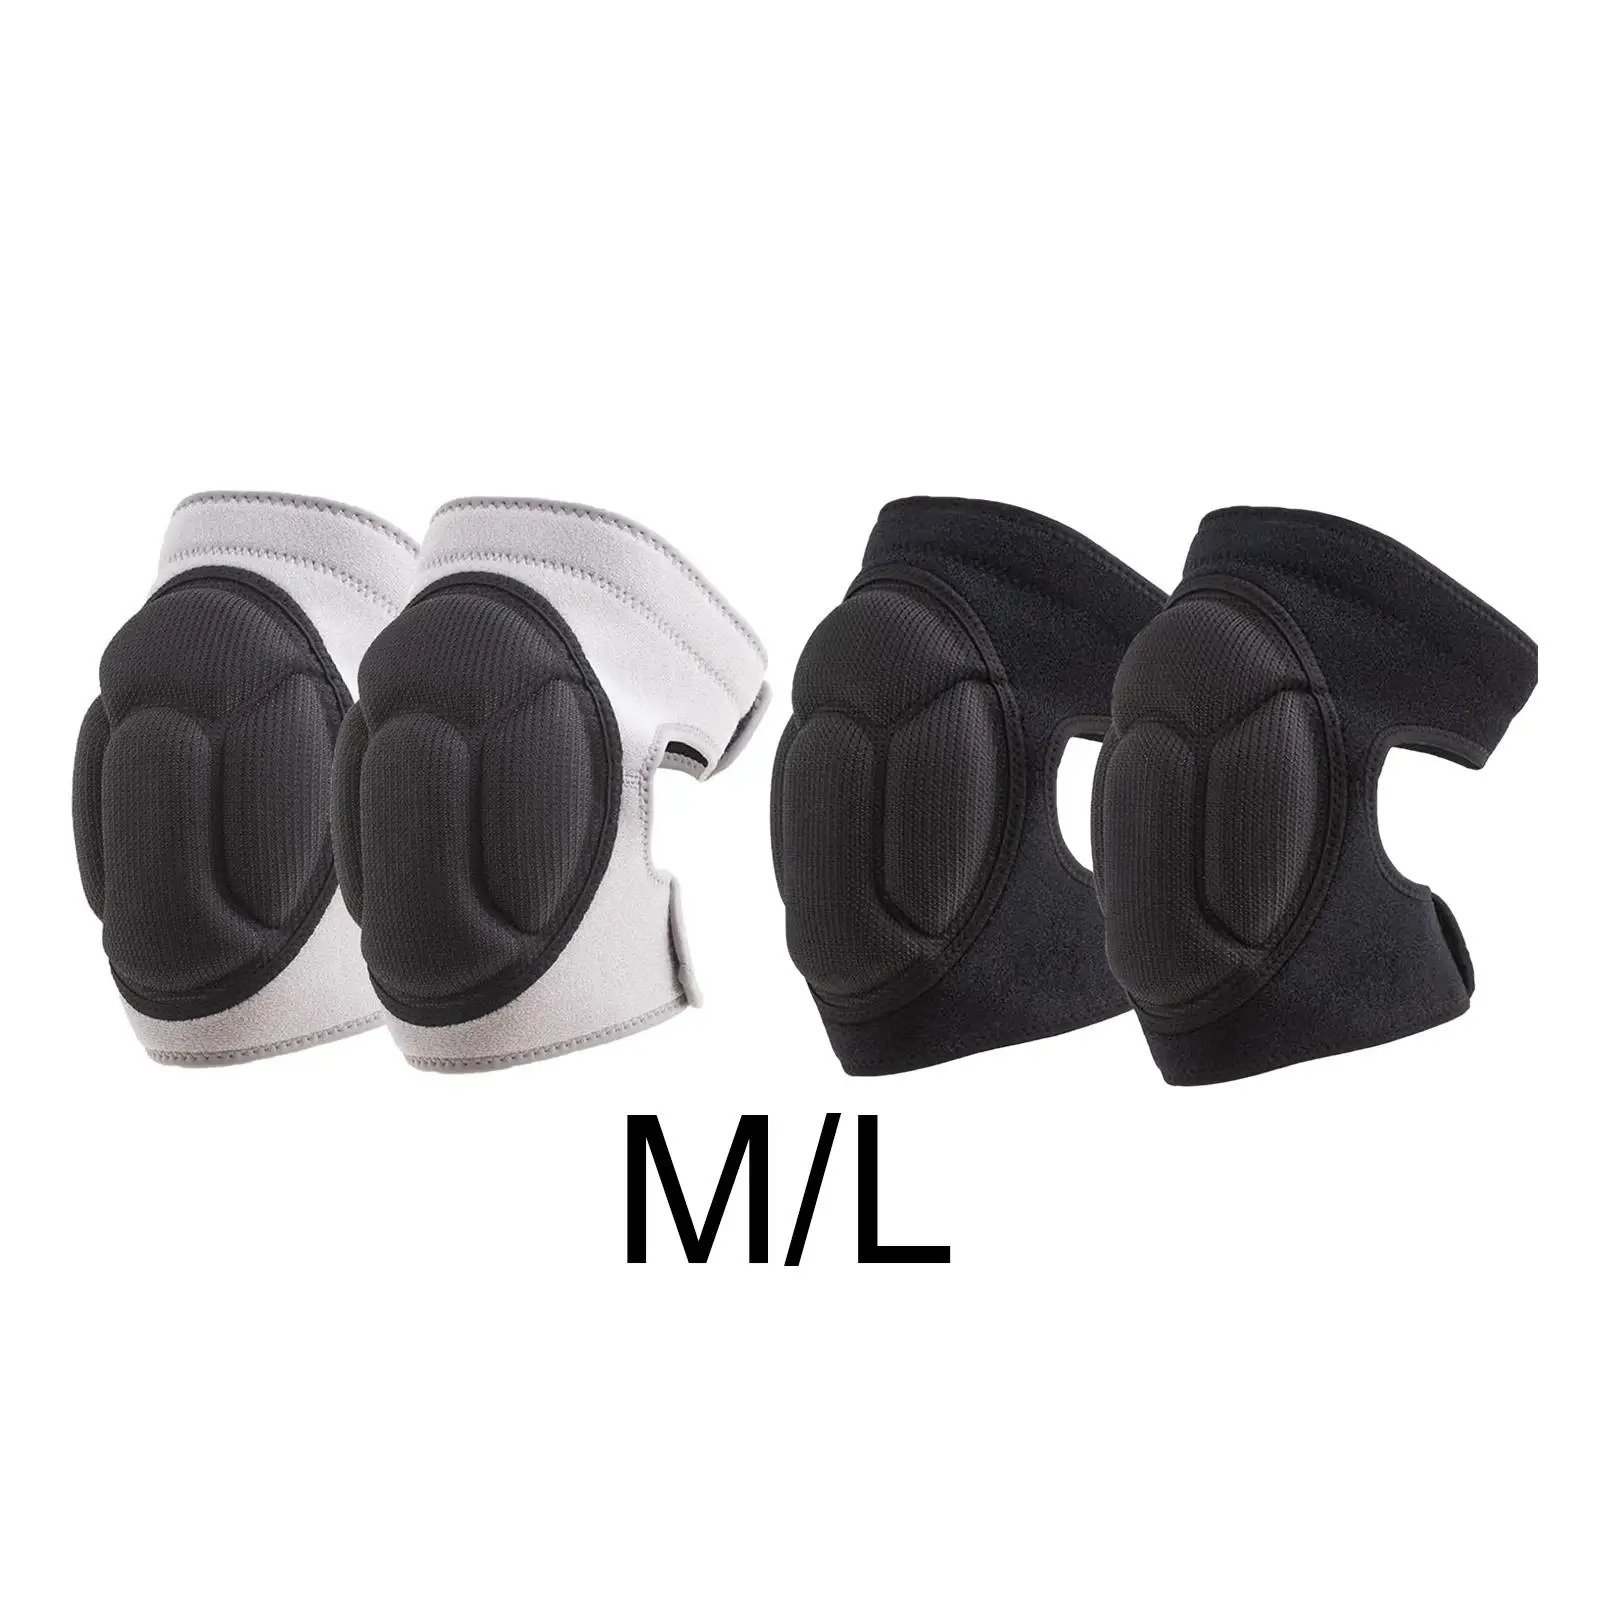 1Pair Knee Pads Skating Outdoor Wrestling Non Slip Breathable Protector Sleeve for Volleyball Work Gardening Basketball Cleaning